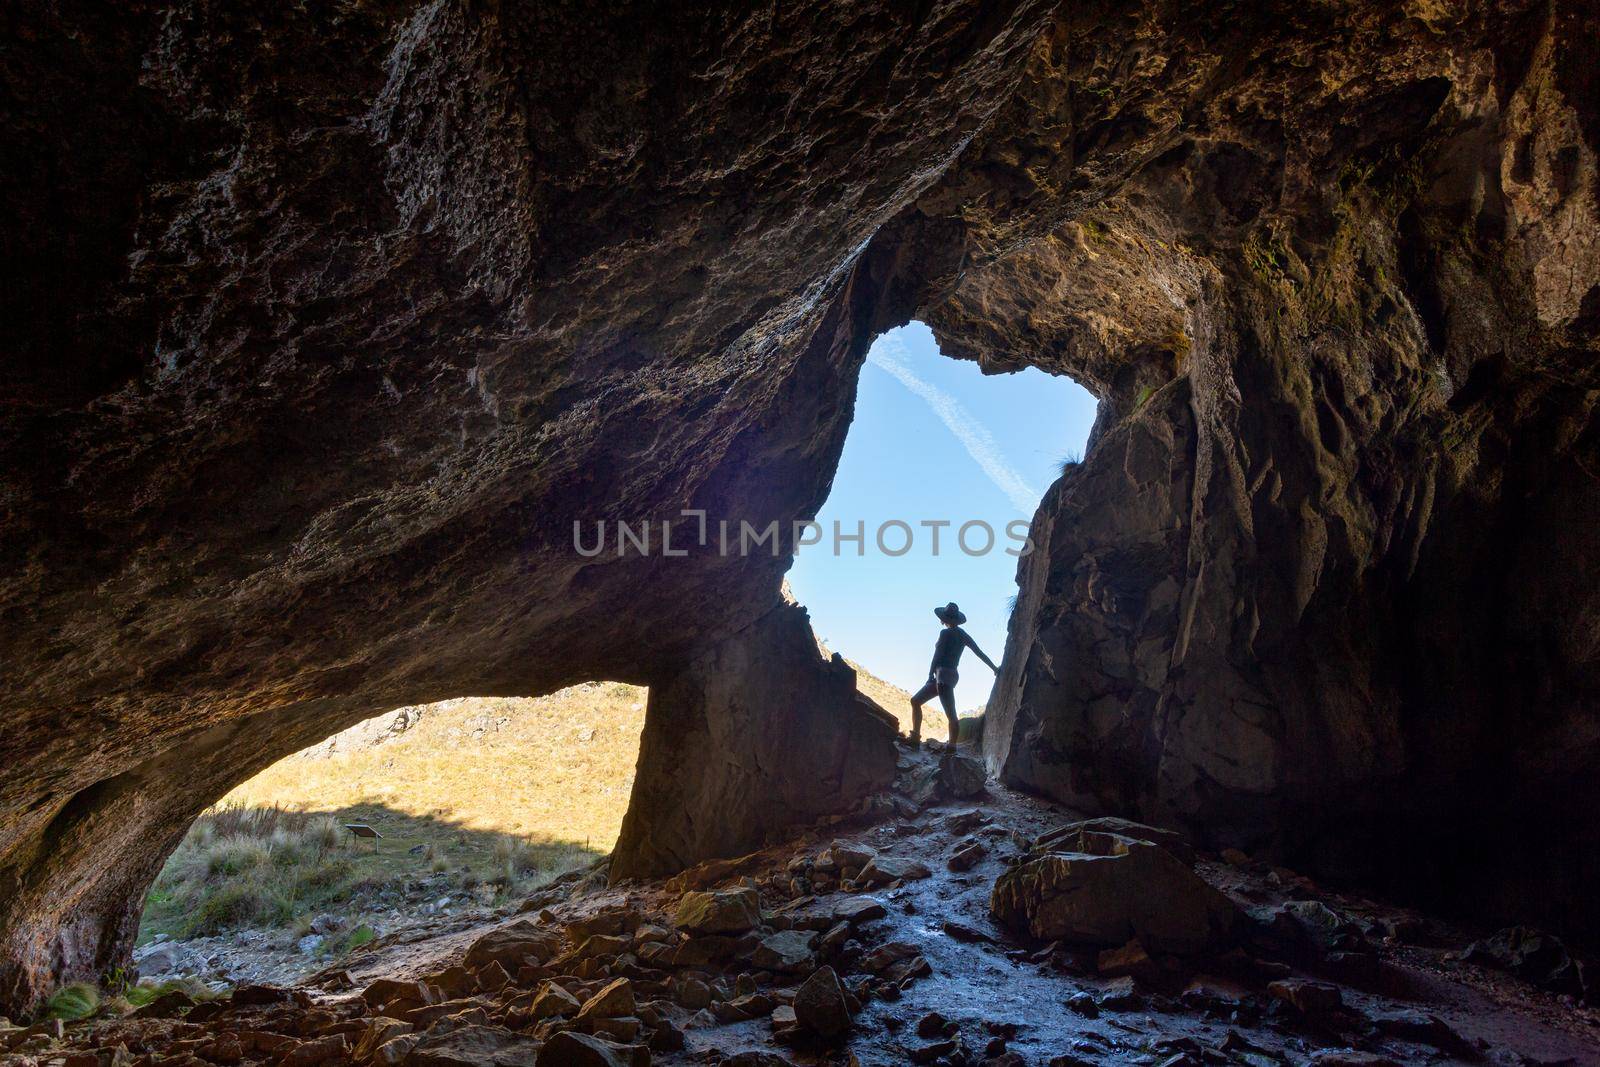 Female hiker exploring caves while on vacation  in NSW Australia